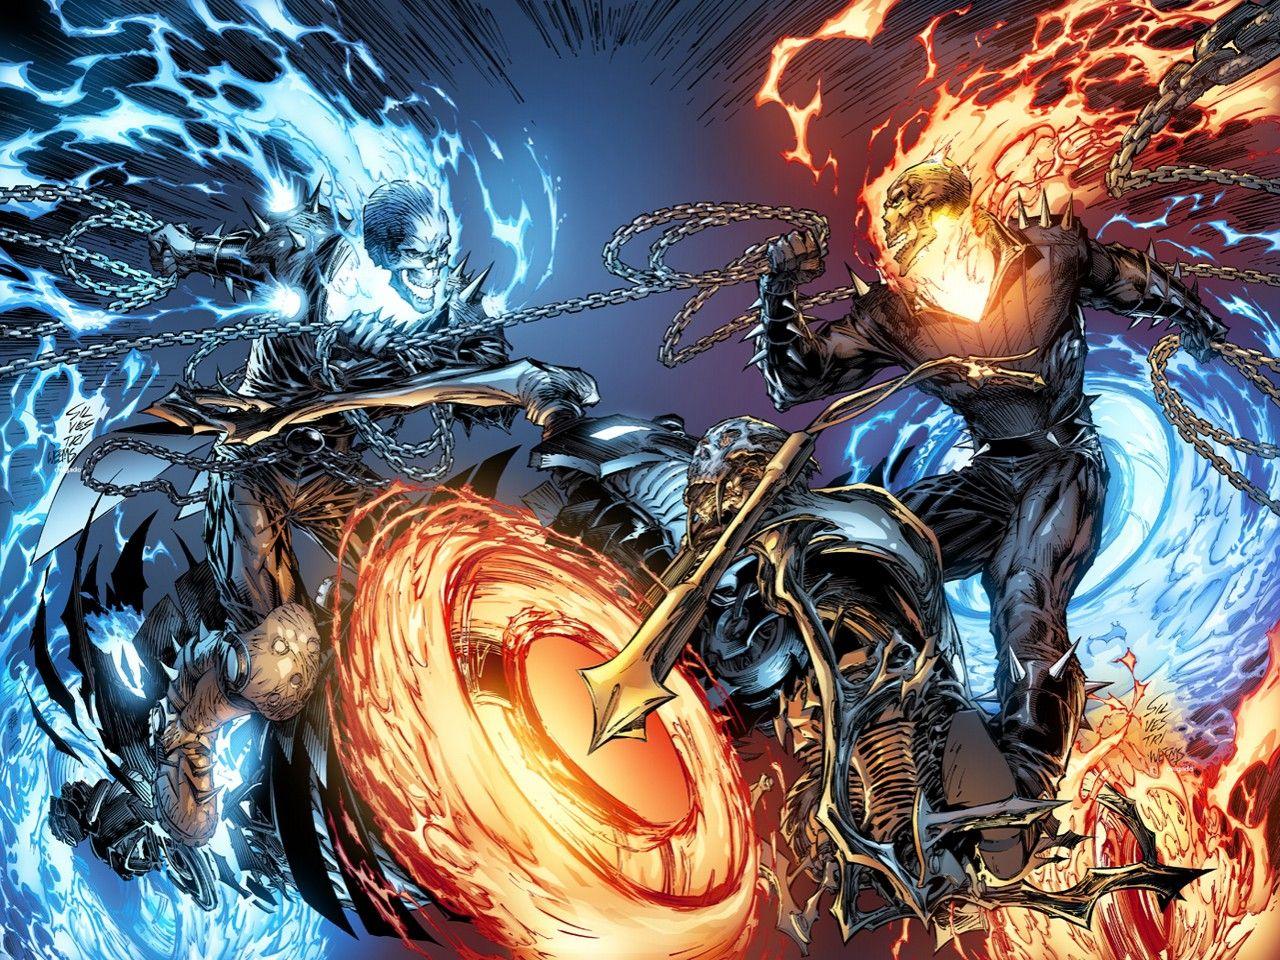 is the blue ghost rider